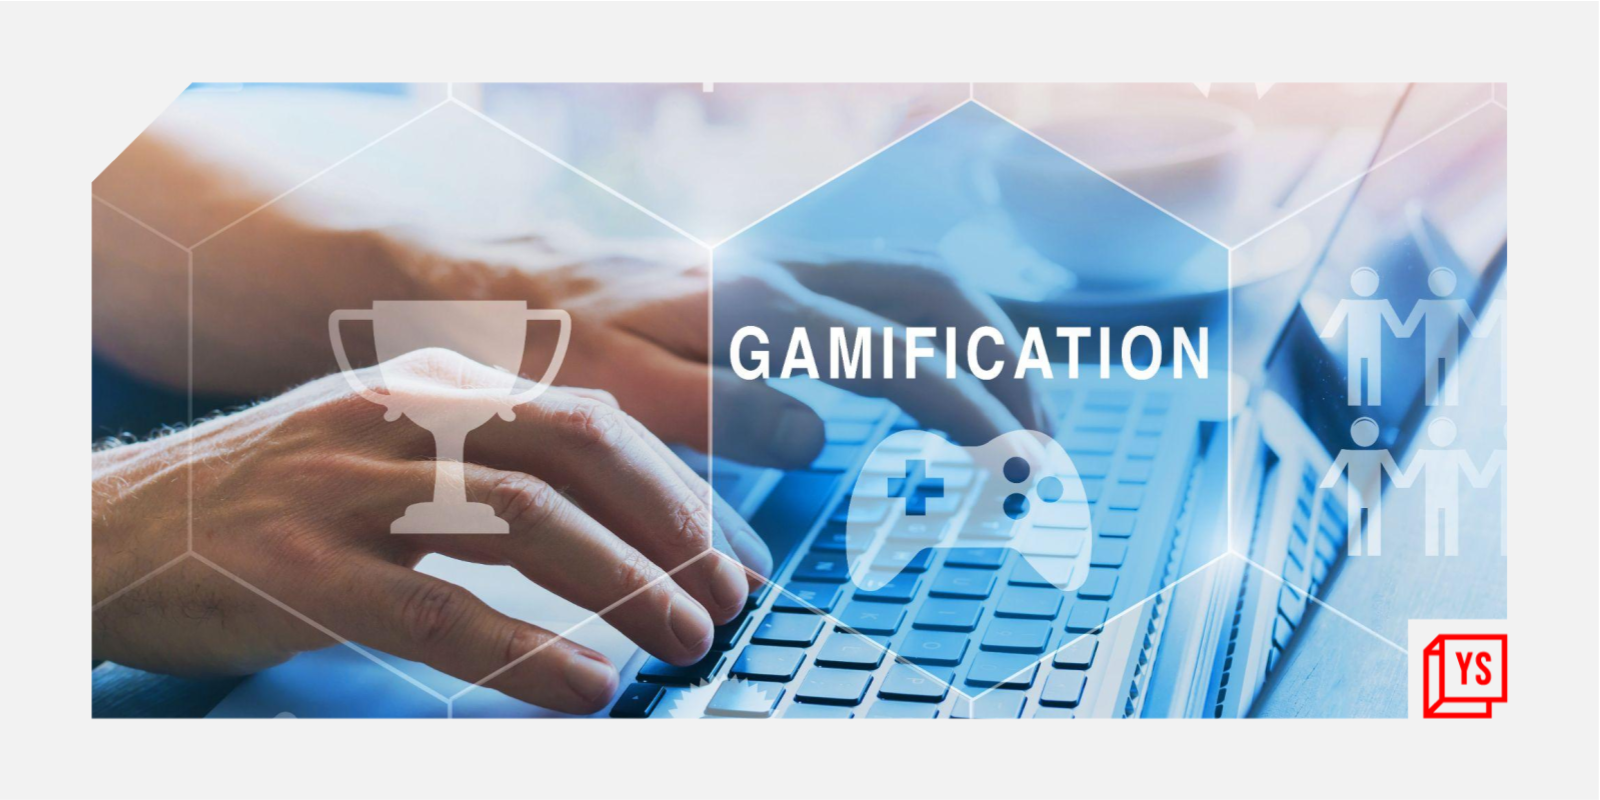 How gamification is changing the iGaming industry

